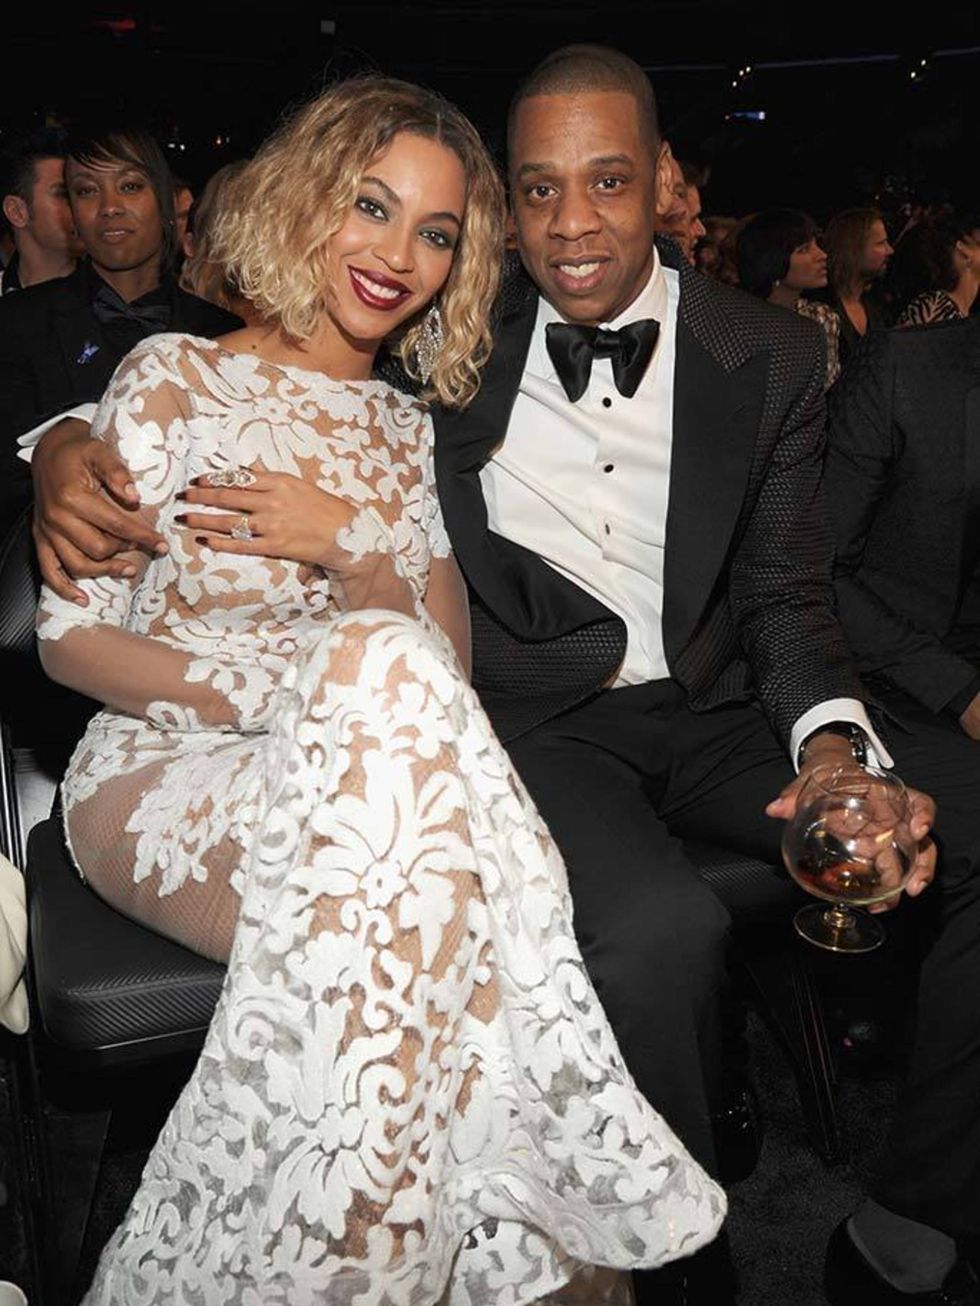 <p>Jay Z and <a href="http://www.elleuk.com/star-style/celebrity-style-files/beyonce">Beyoncé</a>, wearing a Michael Costello dress, post-performance at the 56th Annual Grammy Awards.</p>